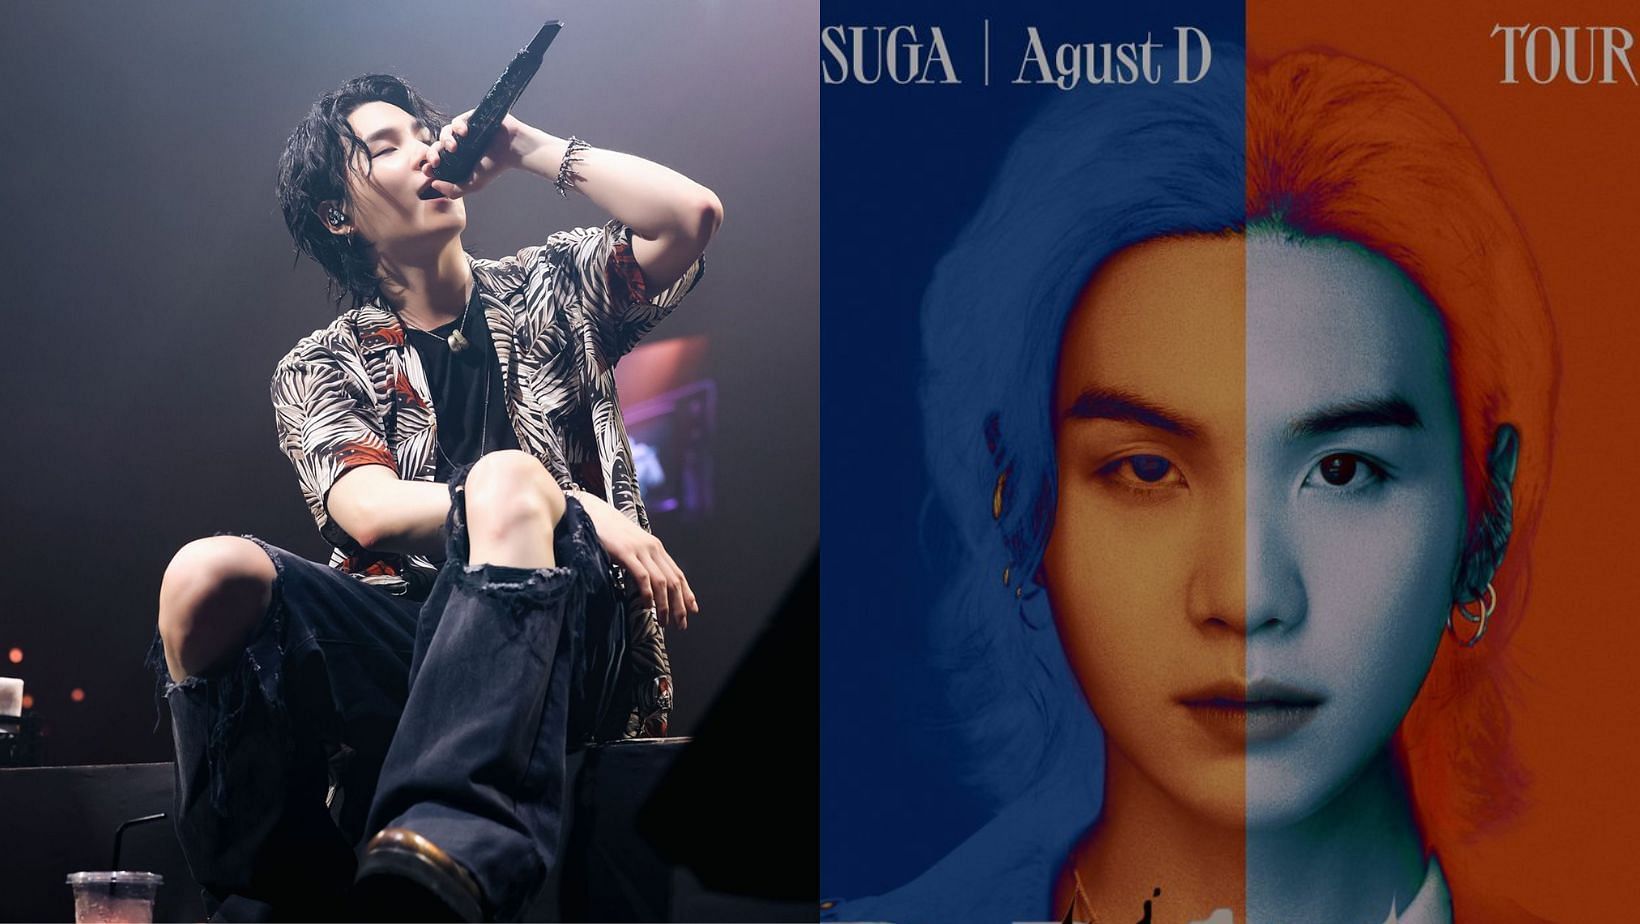 BTS&rsquo; Suga&rsquo;s D-Day tour becomes the highest grossing tour by an Asian soloist in the US history. (Images via X/@chartdata)